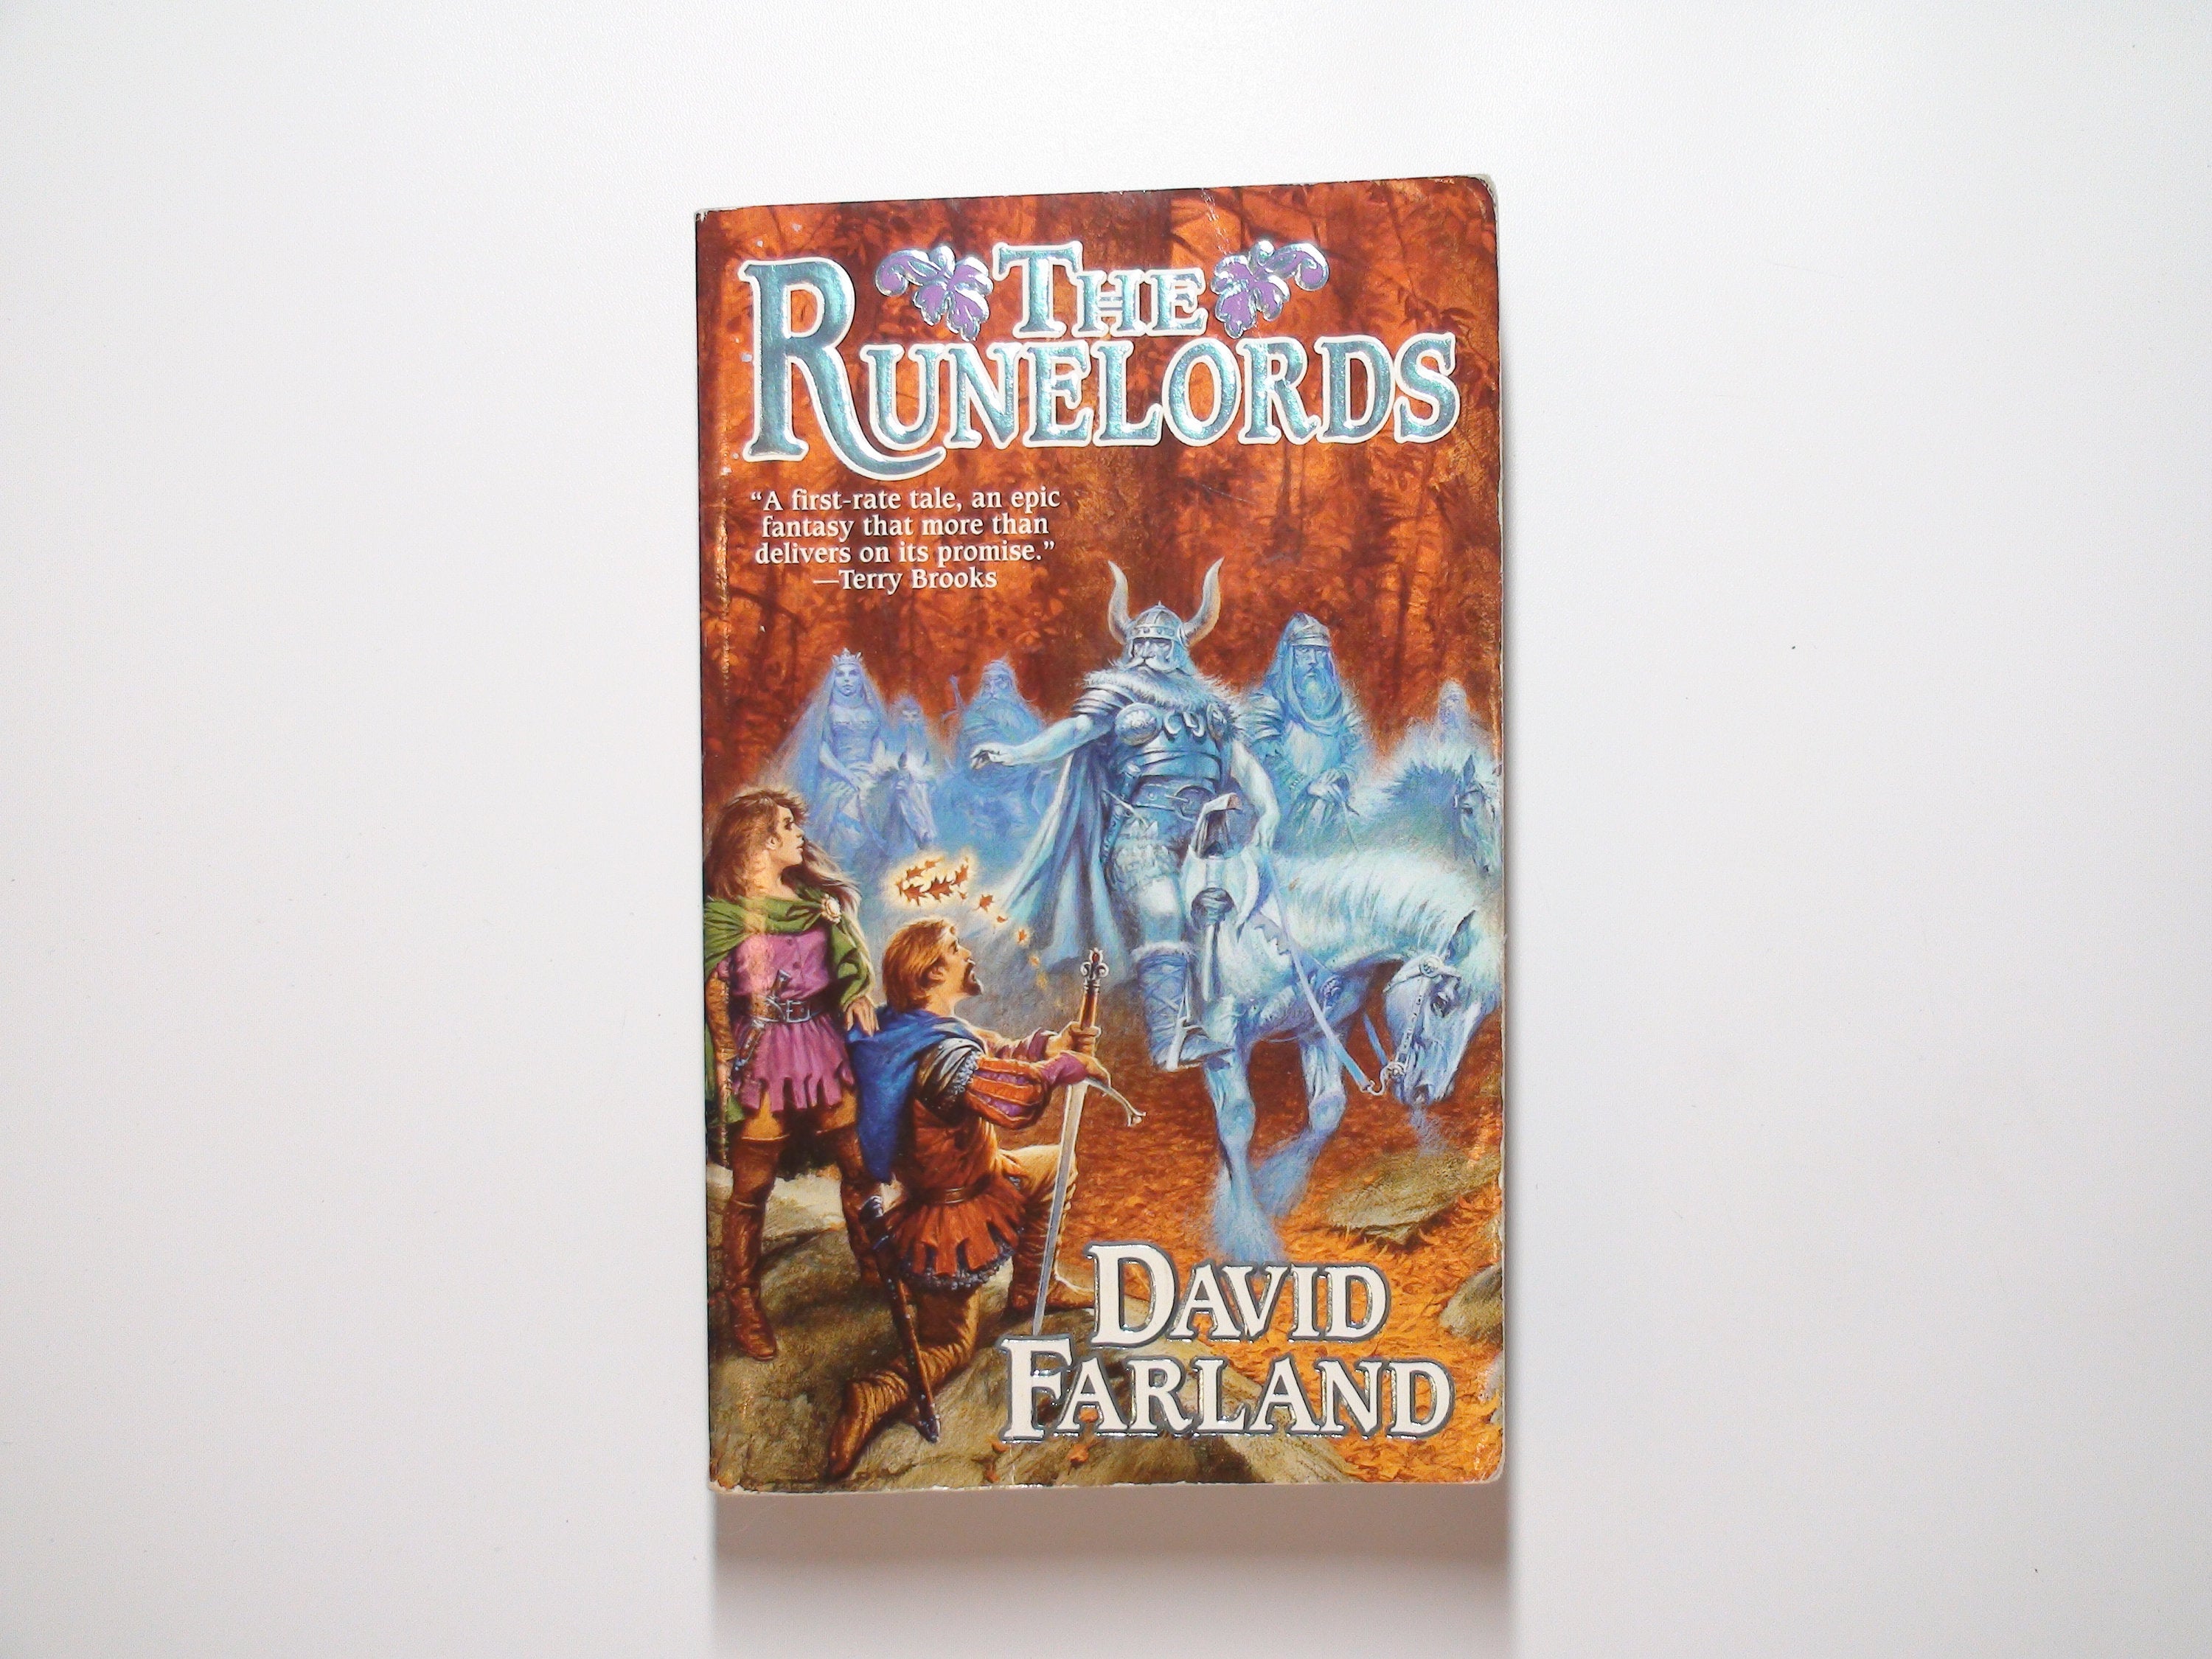 The Runelords, The Sum of All Men, David Farland, Paperback, 1998